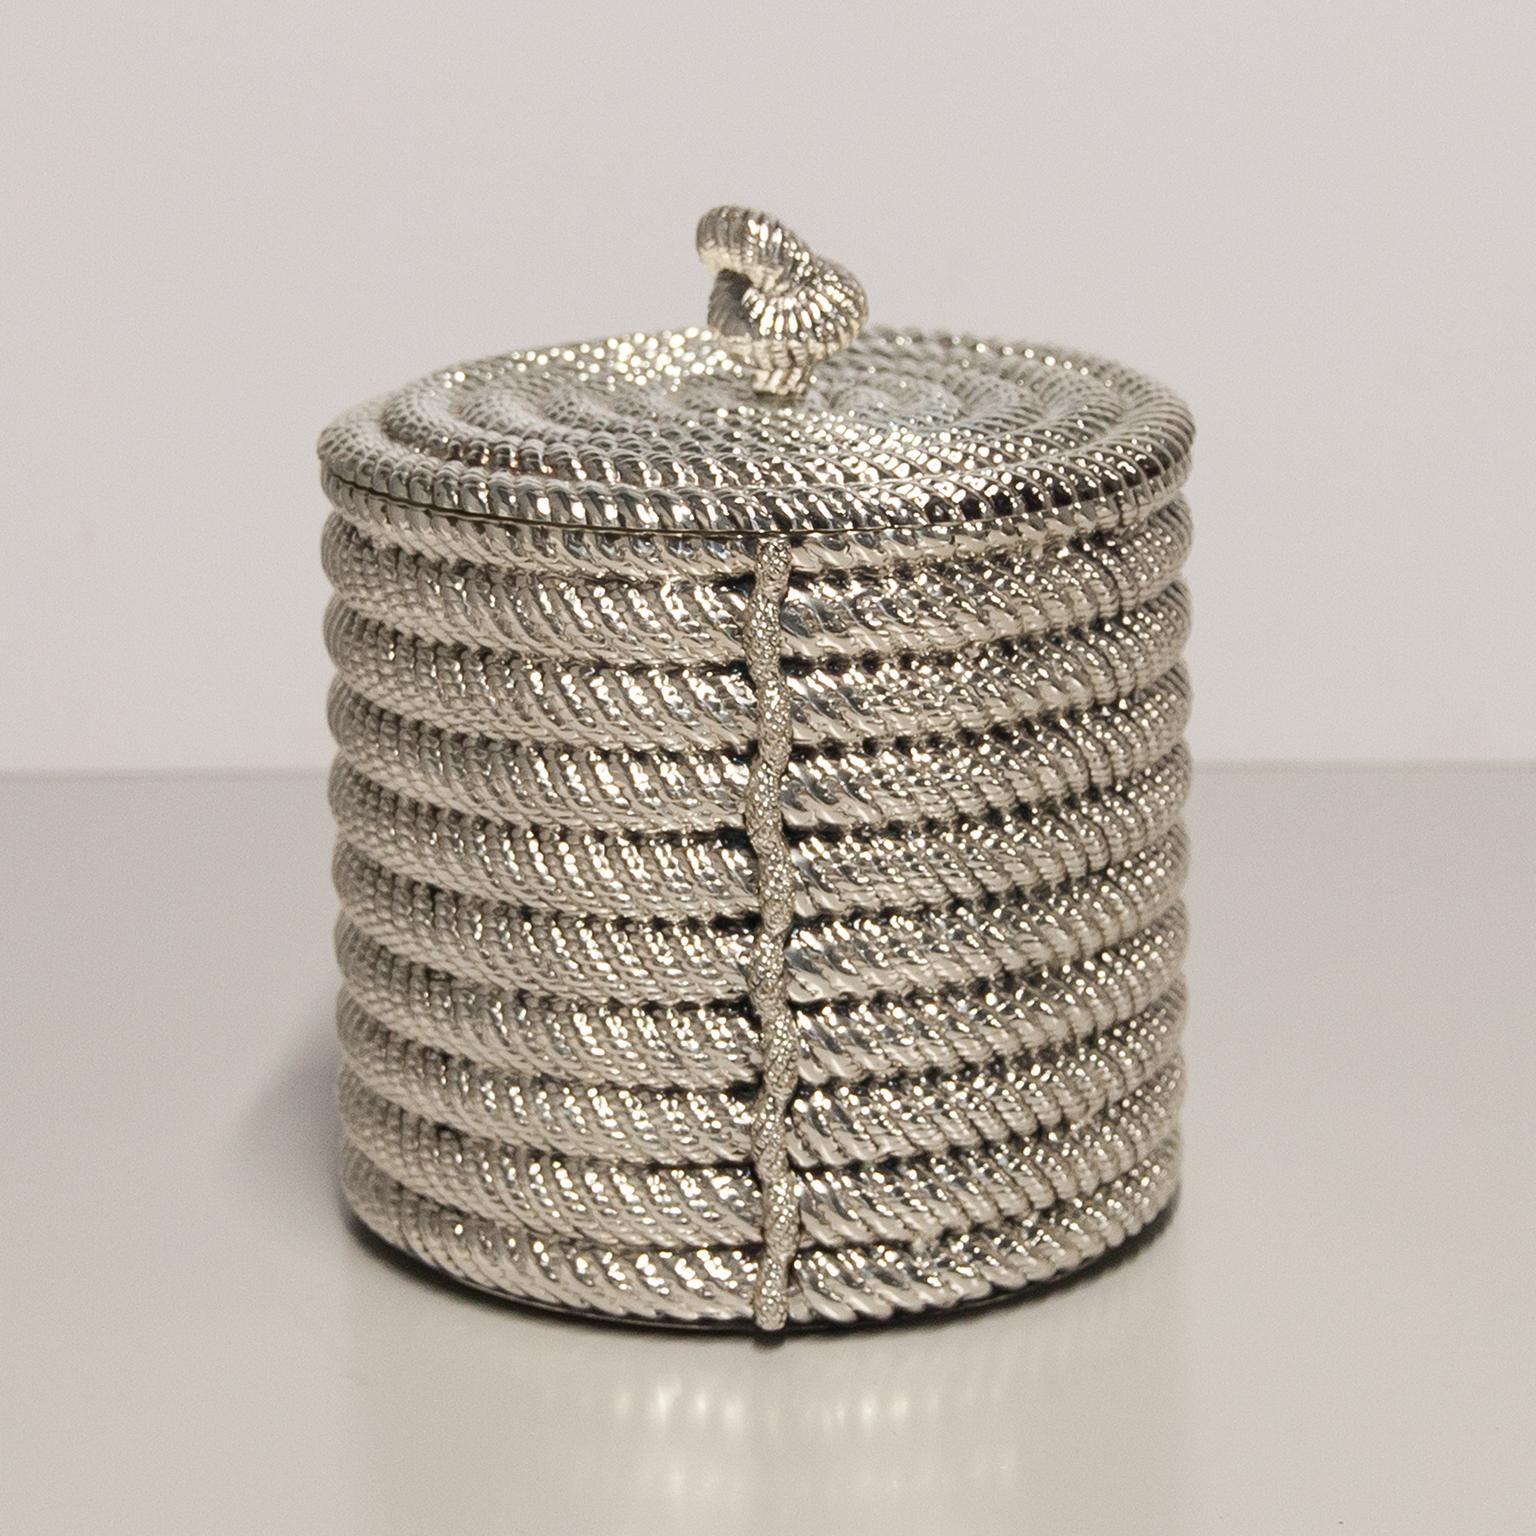 A stylish silver plated ice bucket of cylindrical design in the form of coiled rope with matching lid, by Spanish maker Valenti; circa 1975. The inside liner is insulated to help keep things cool and the inlay is aluminium.
Excellent condition